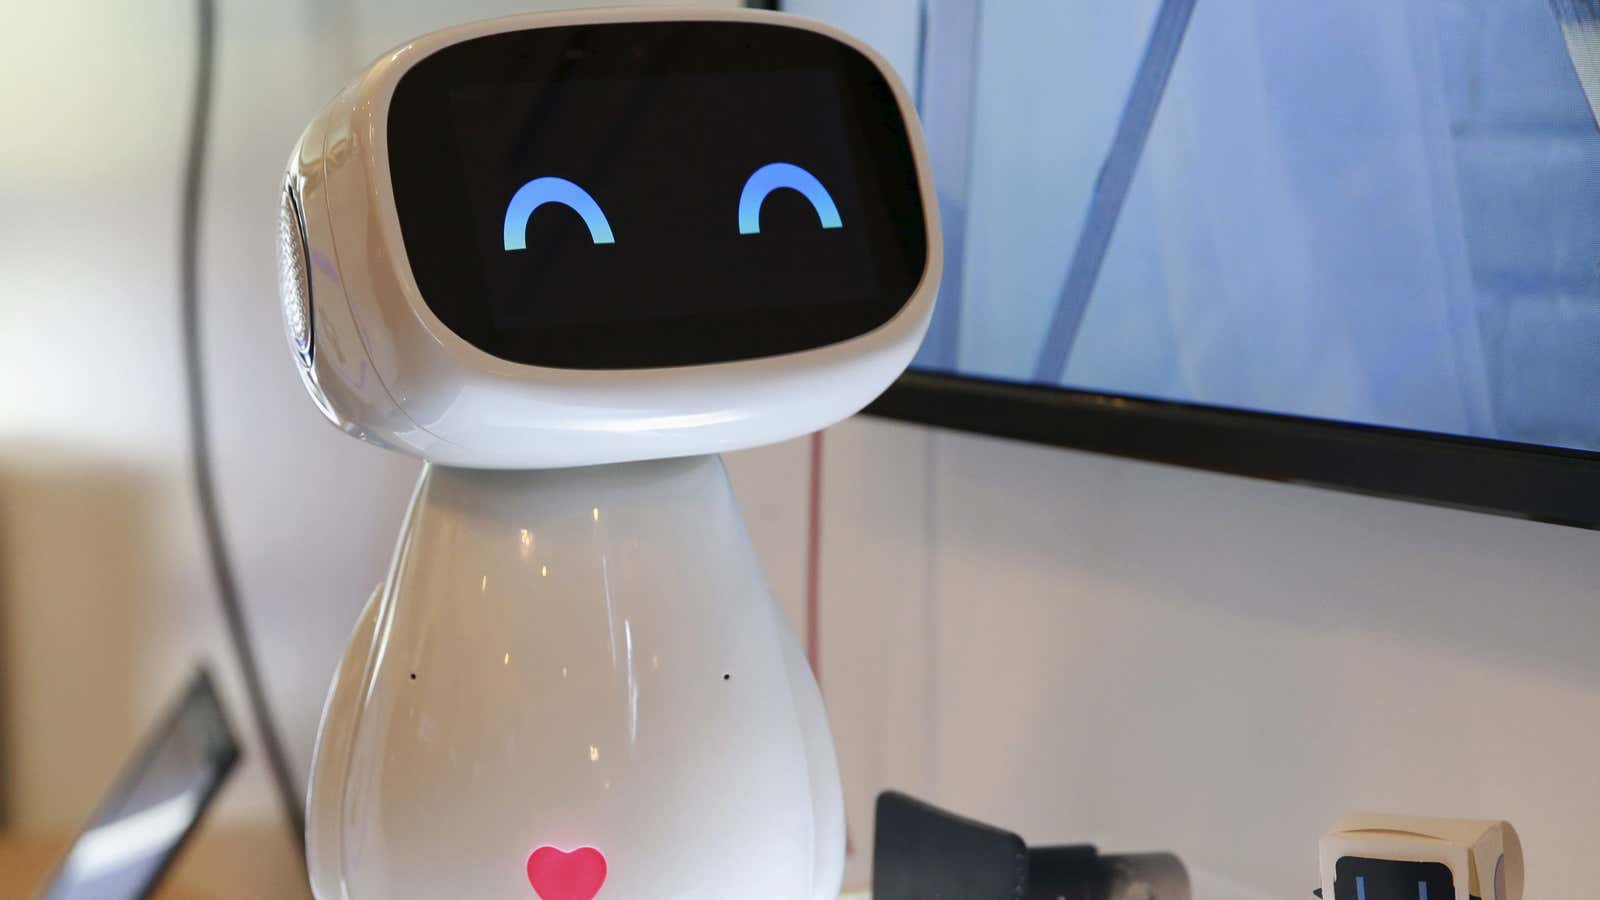 Would you take advice from this robot?